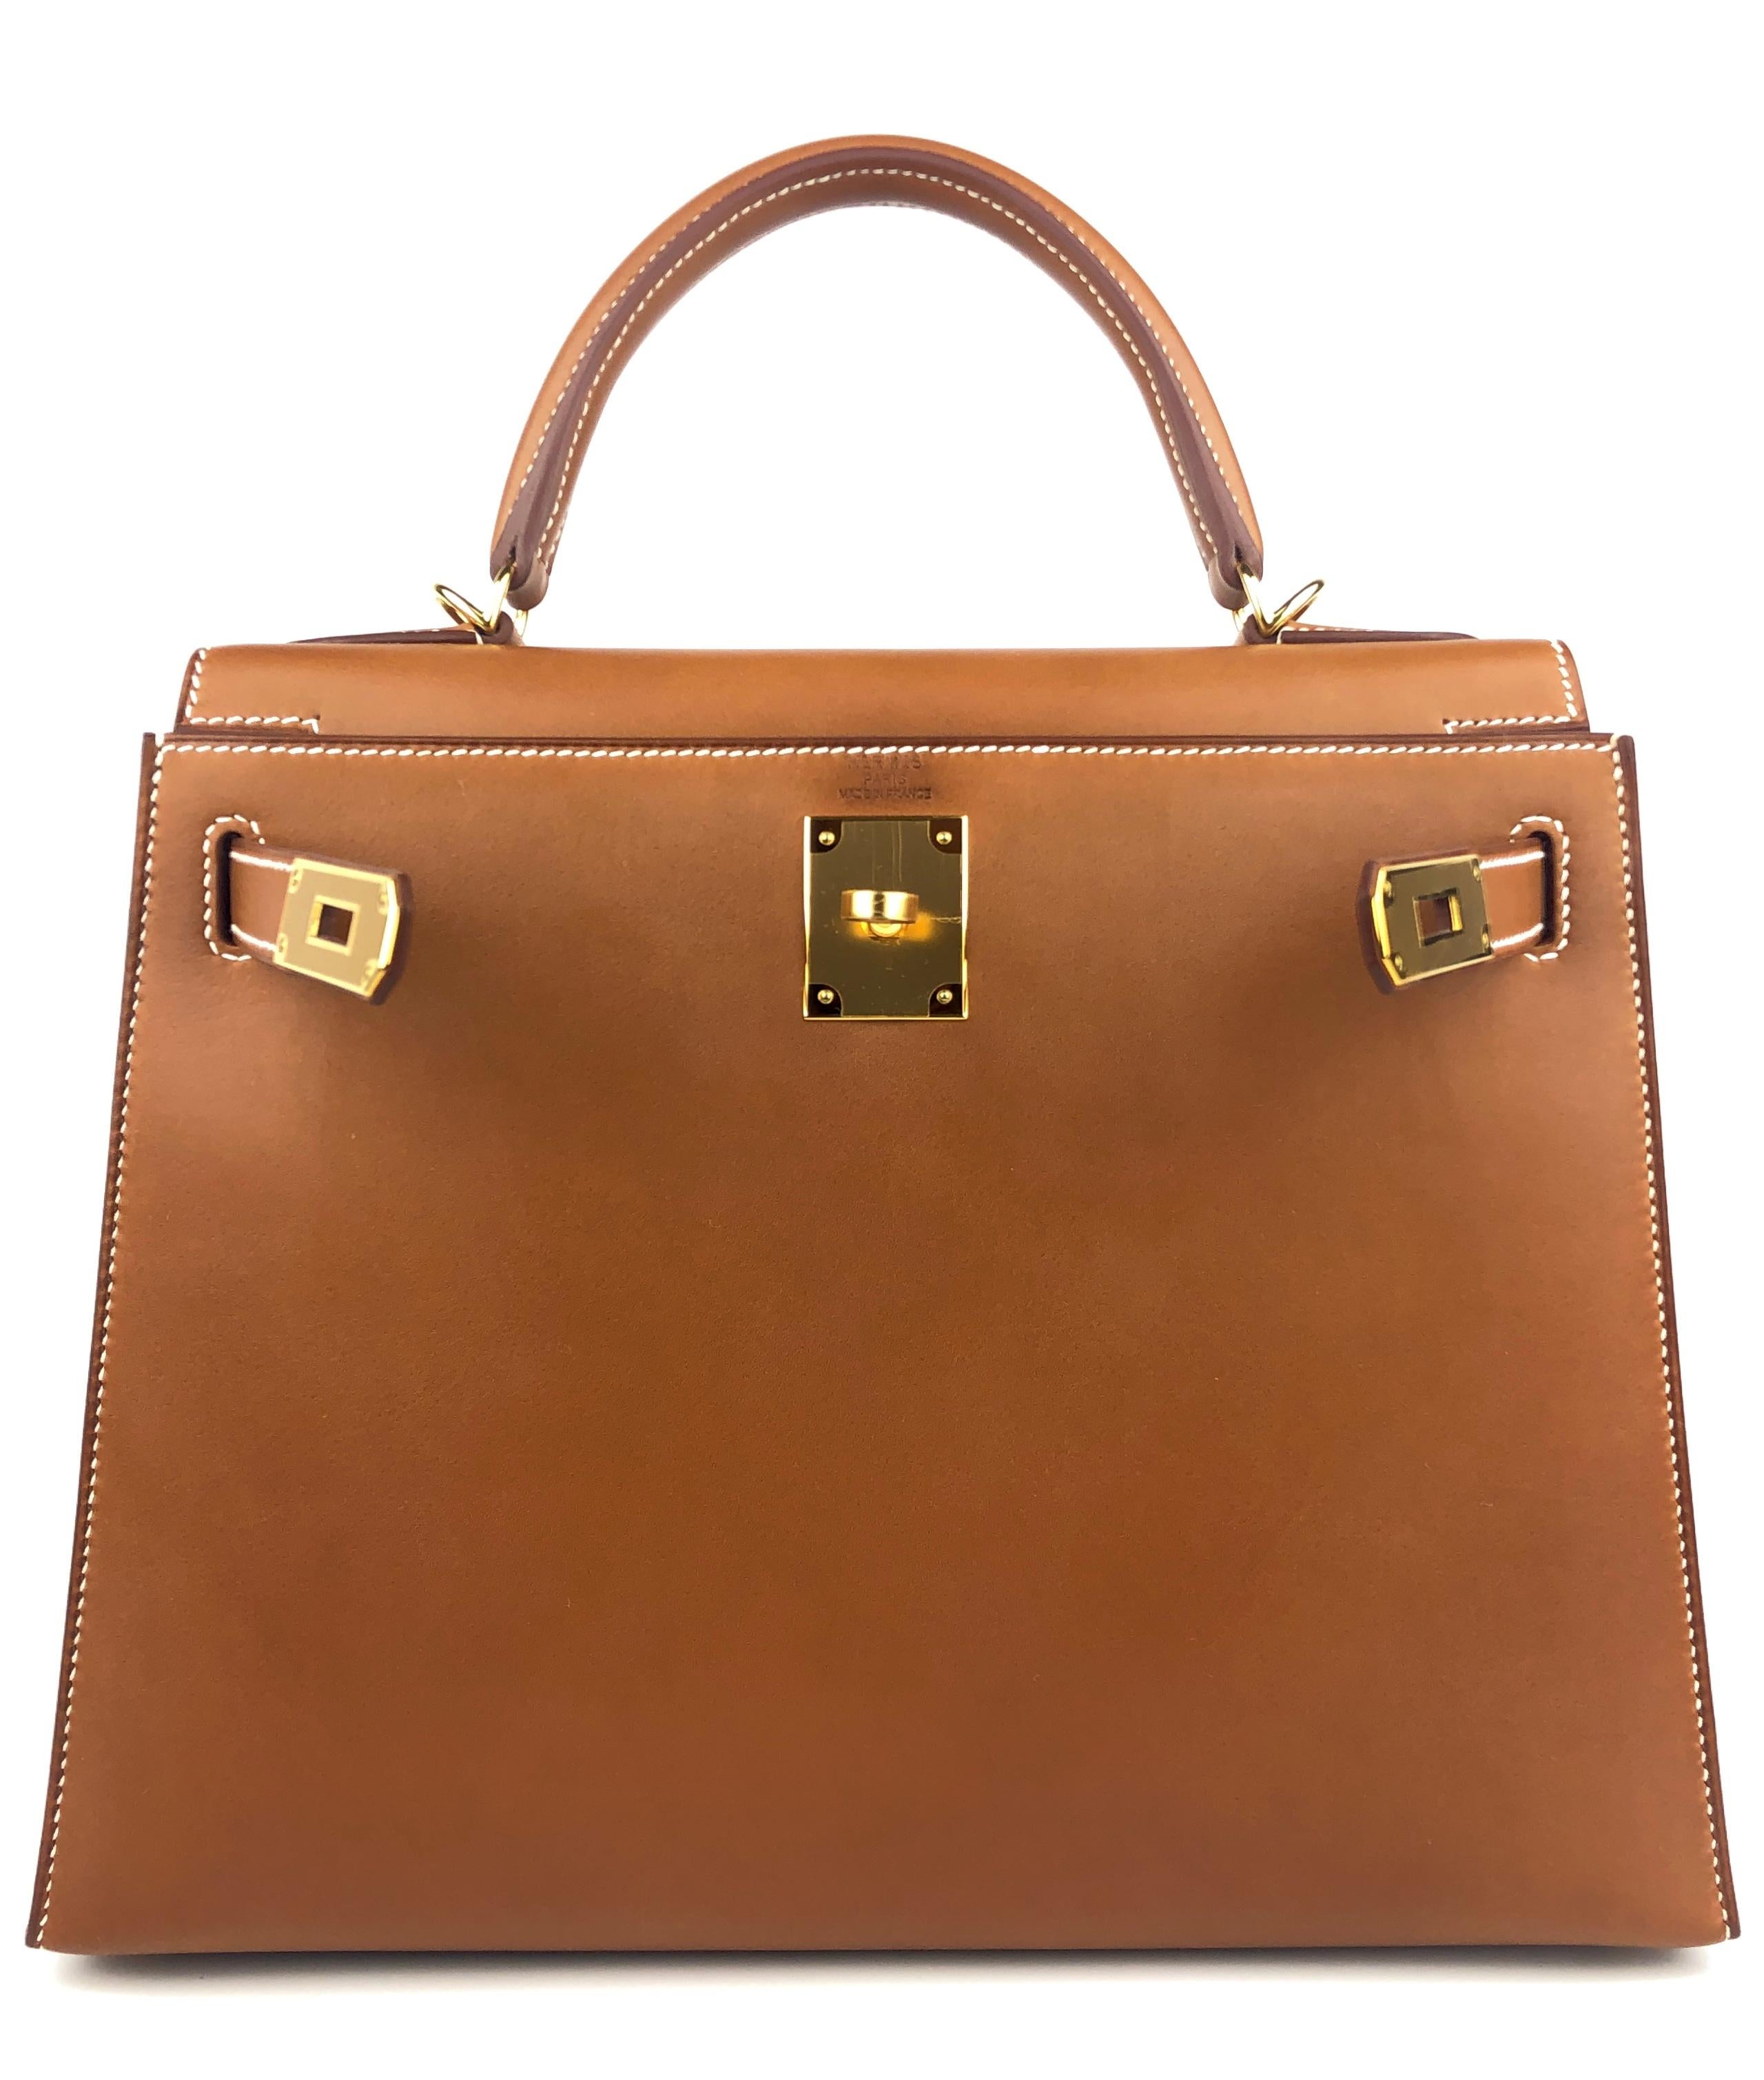 Absolutely Stunning Rare Collectors Hermes Kelly 28 Sellier Barenia Fauve Leather complimented by Gold Hardware. Excellent Condition Plastic on hardware and feet. 2018 C Stamp. 

Please keep in mind that this is a pre owned item, the bag has been